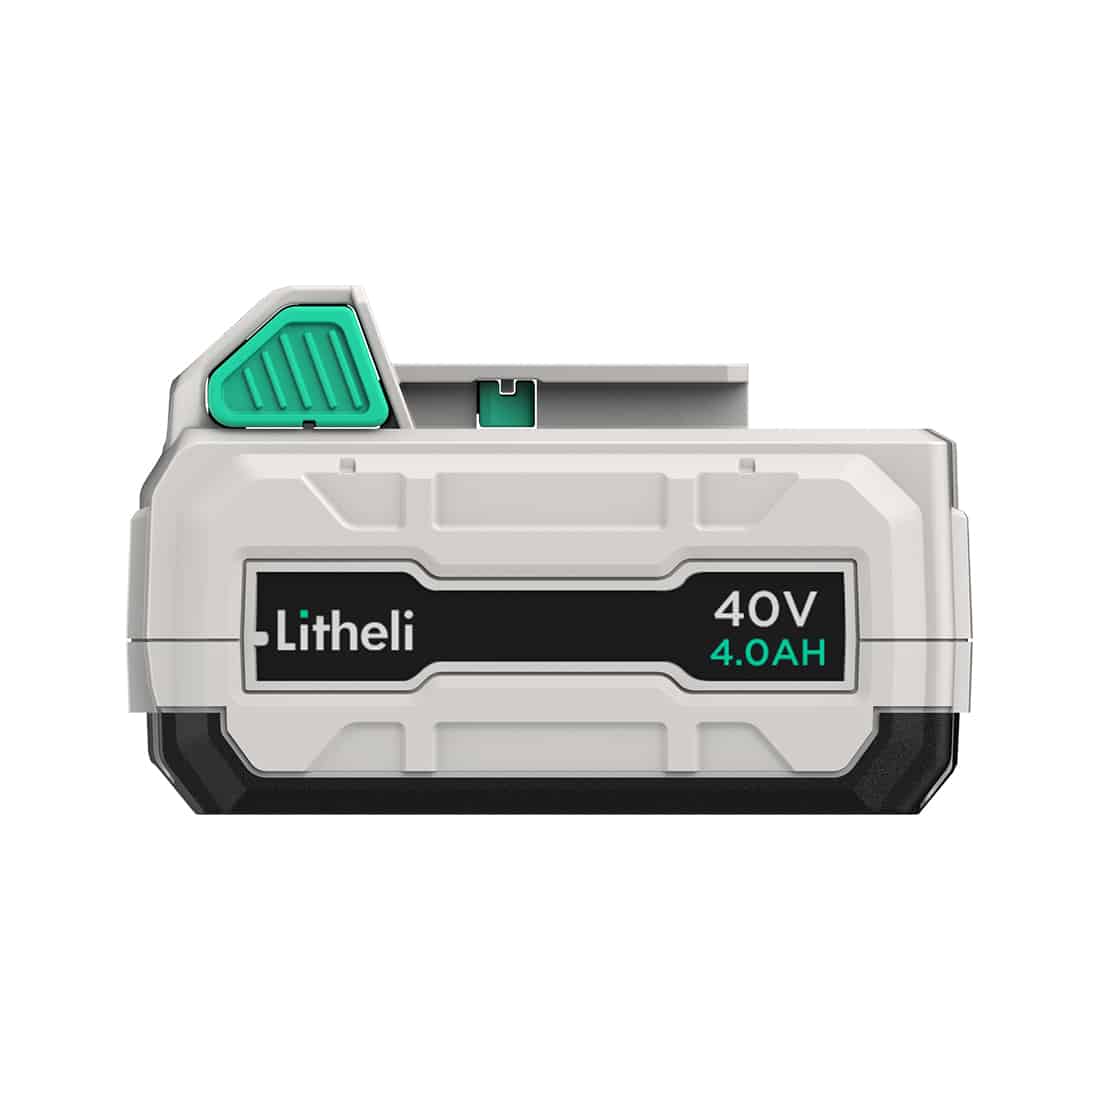 Litheli 40V 4.0Ah Lithium Ion Battery Pack